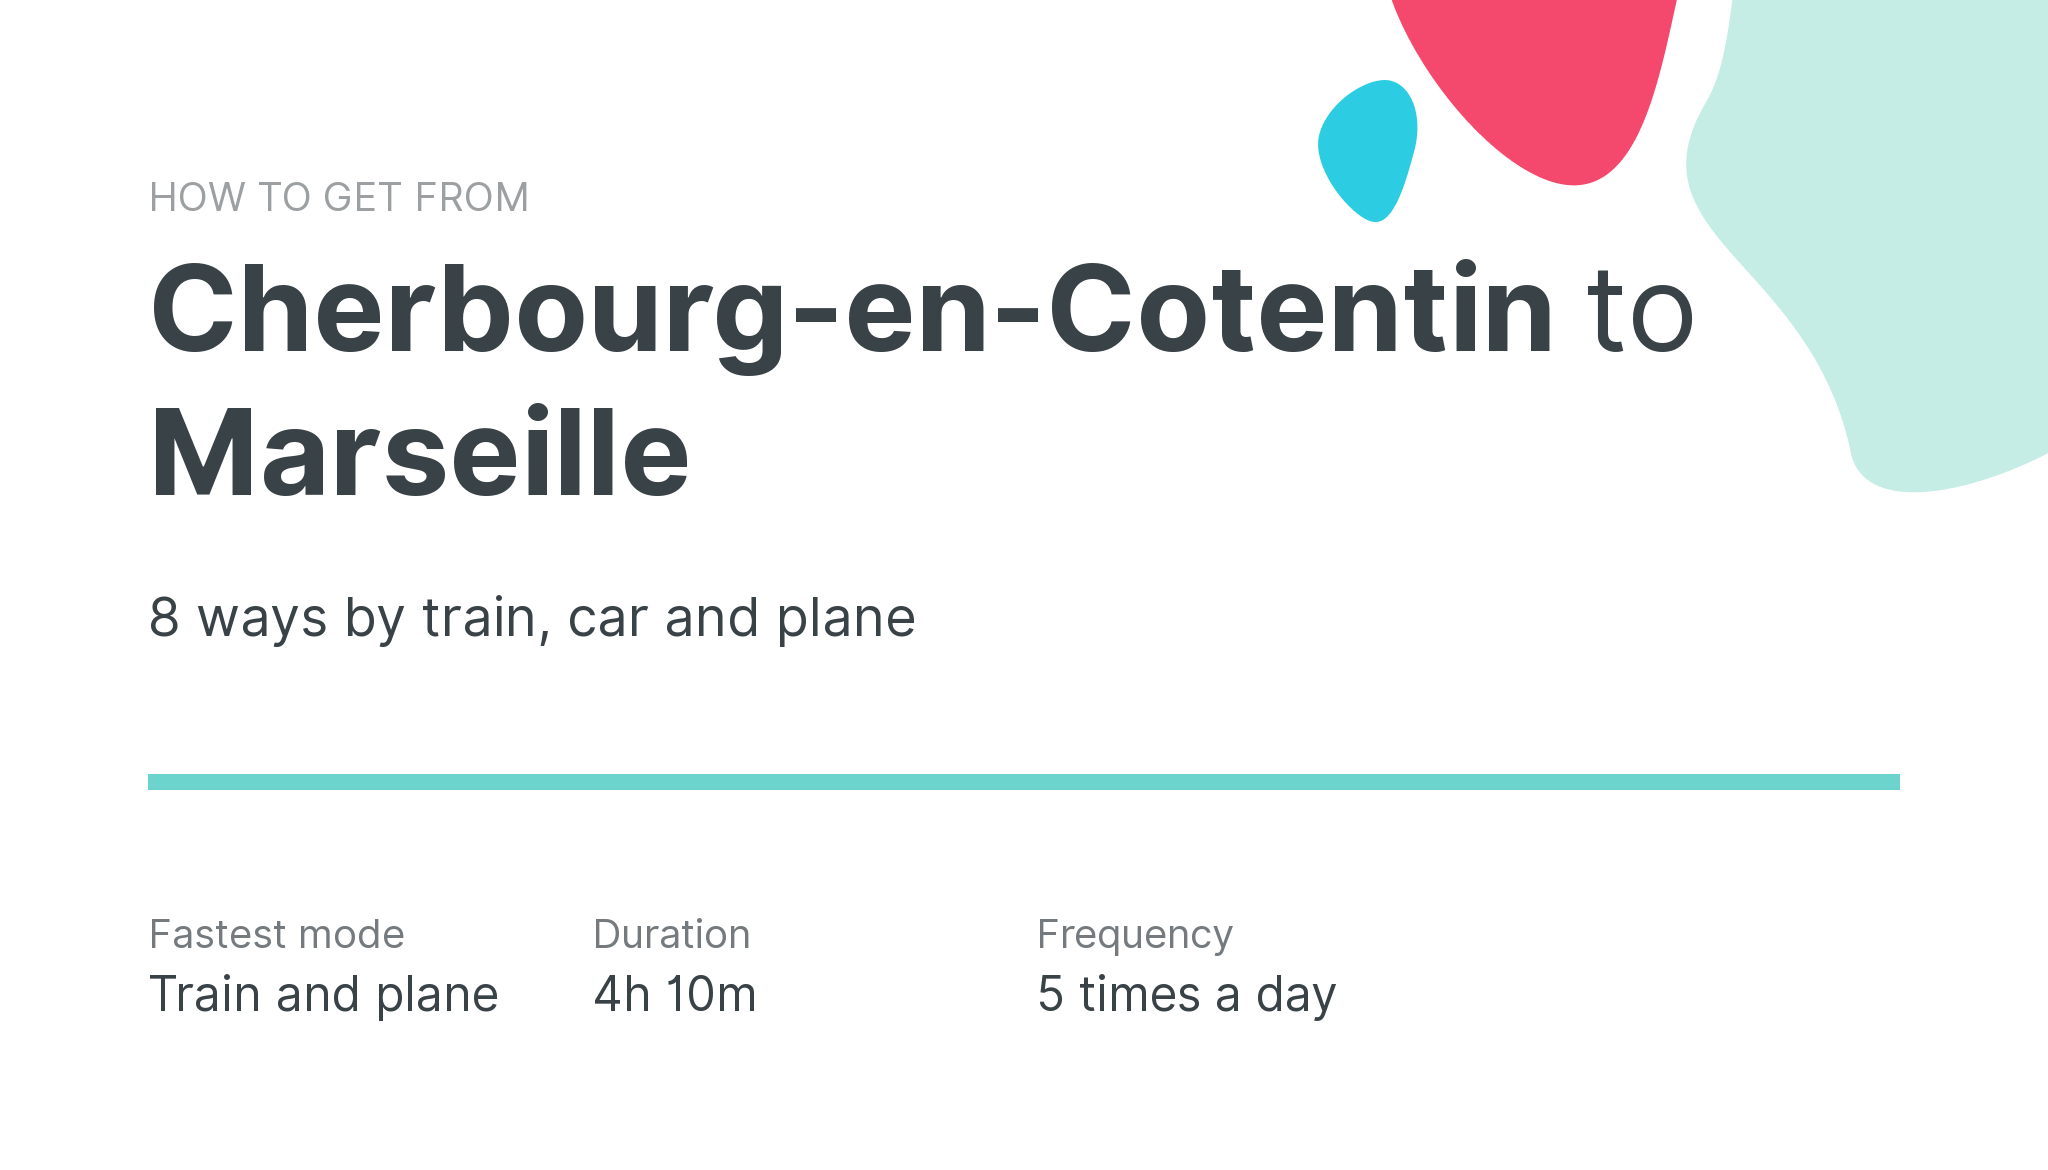 How do I get from Cherbourg-en-Cotentin to Marseille